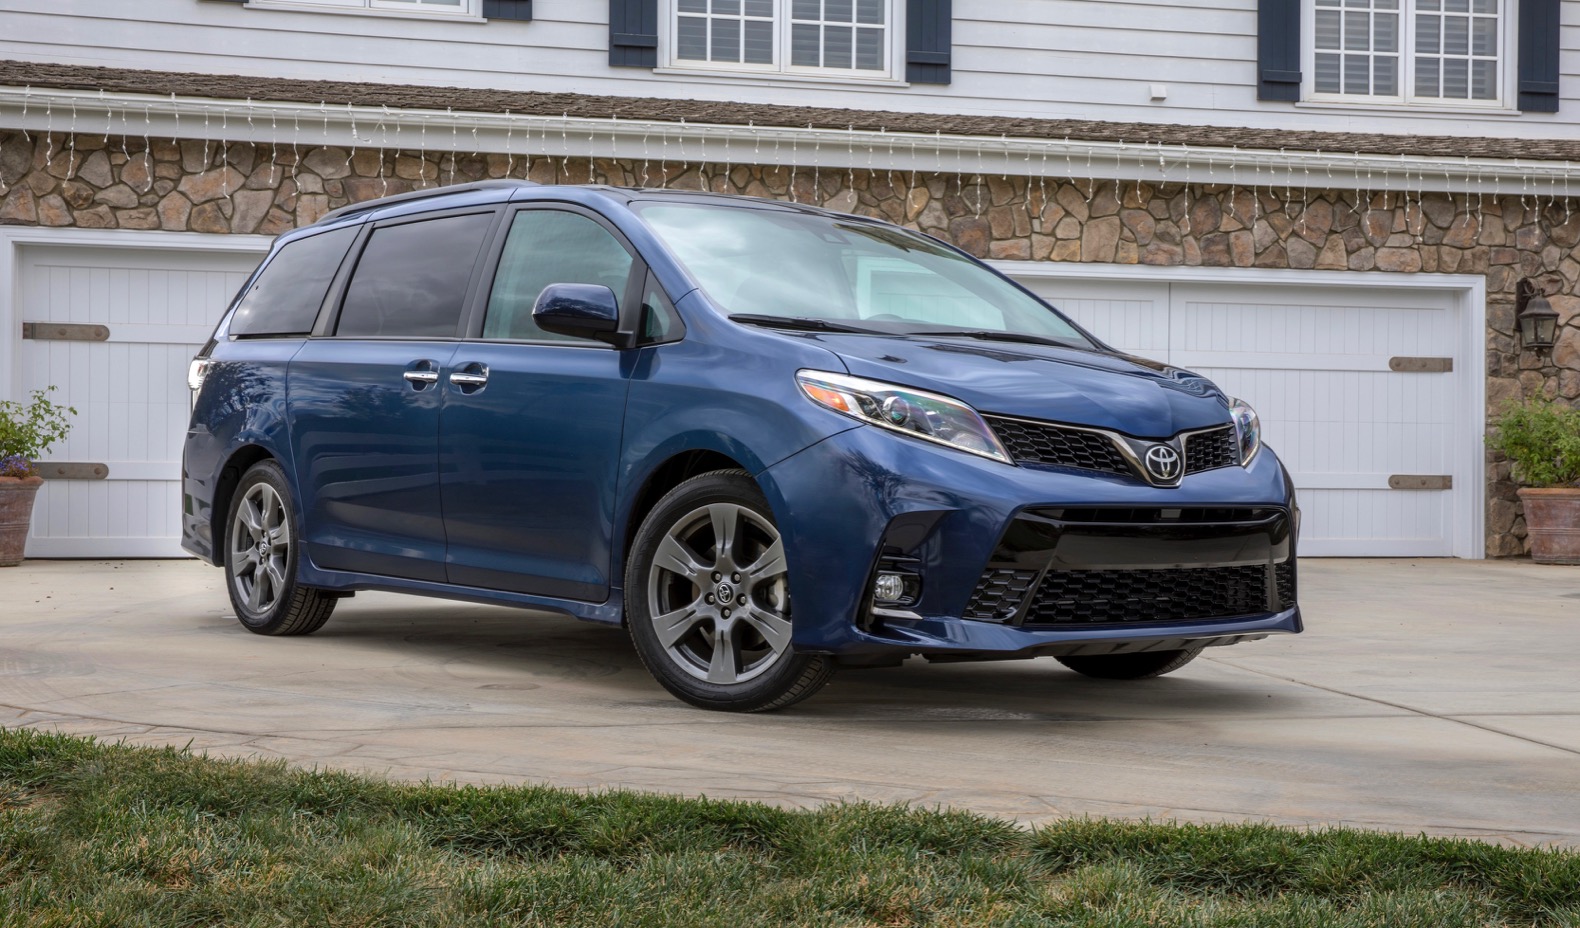 2019 Toyota Sienna Review: Showing its age - The Torque Report